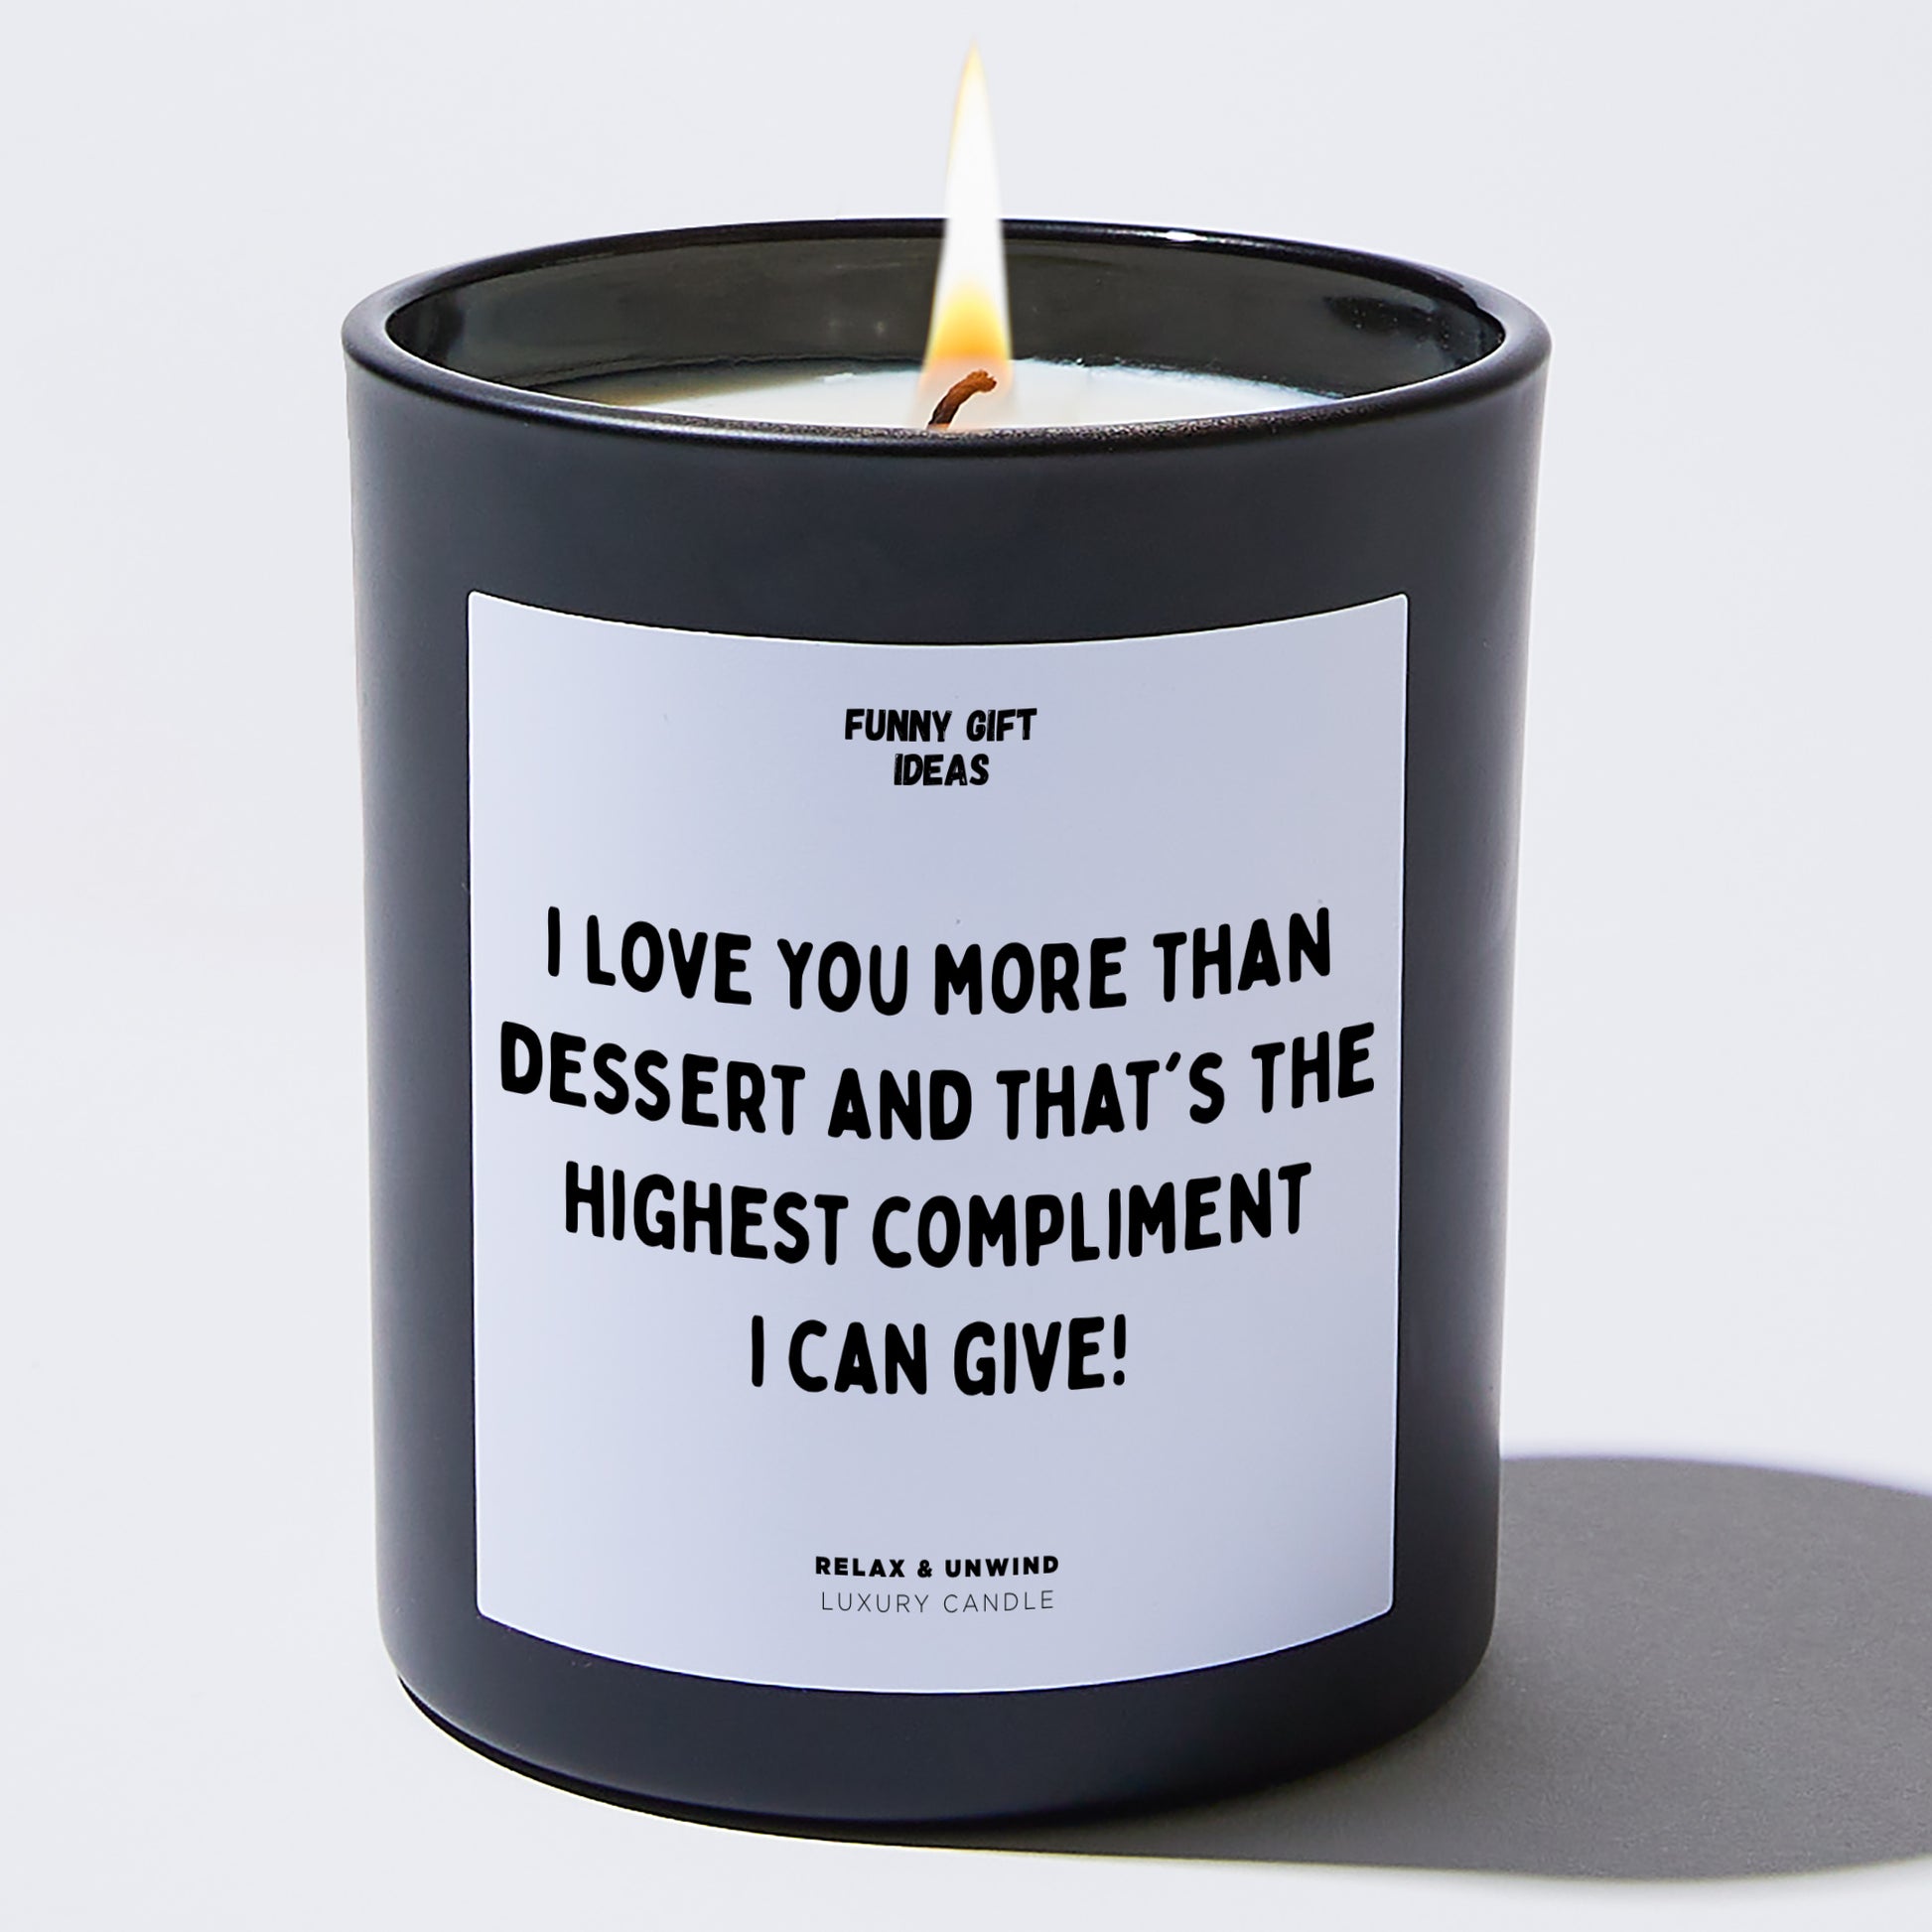 Anniversary I Love You More Than Dessert, and That's the Highest Compliment I Can Give! - Funny Gift Ideas